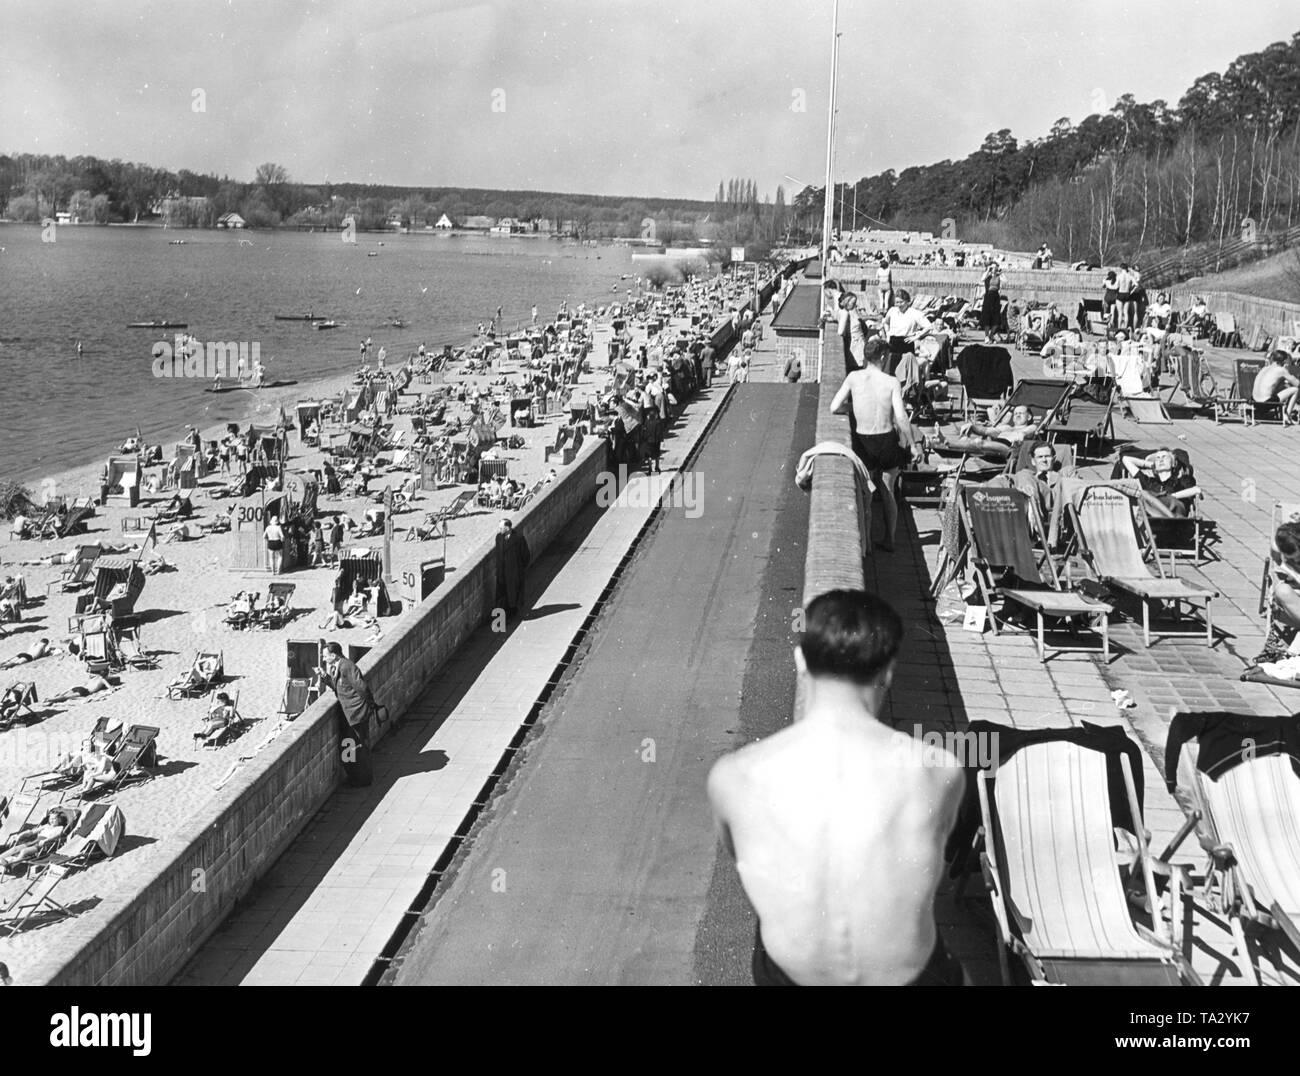 View of the Wannsee lido in Berlin. The popular excursion site is well-attended on a Sunday. Stock Photo